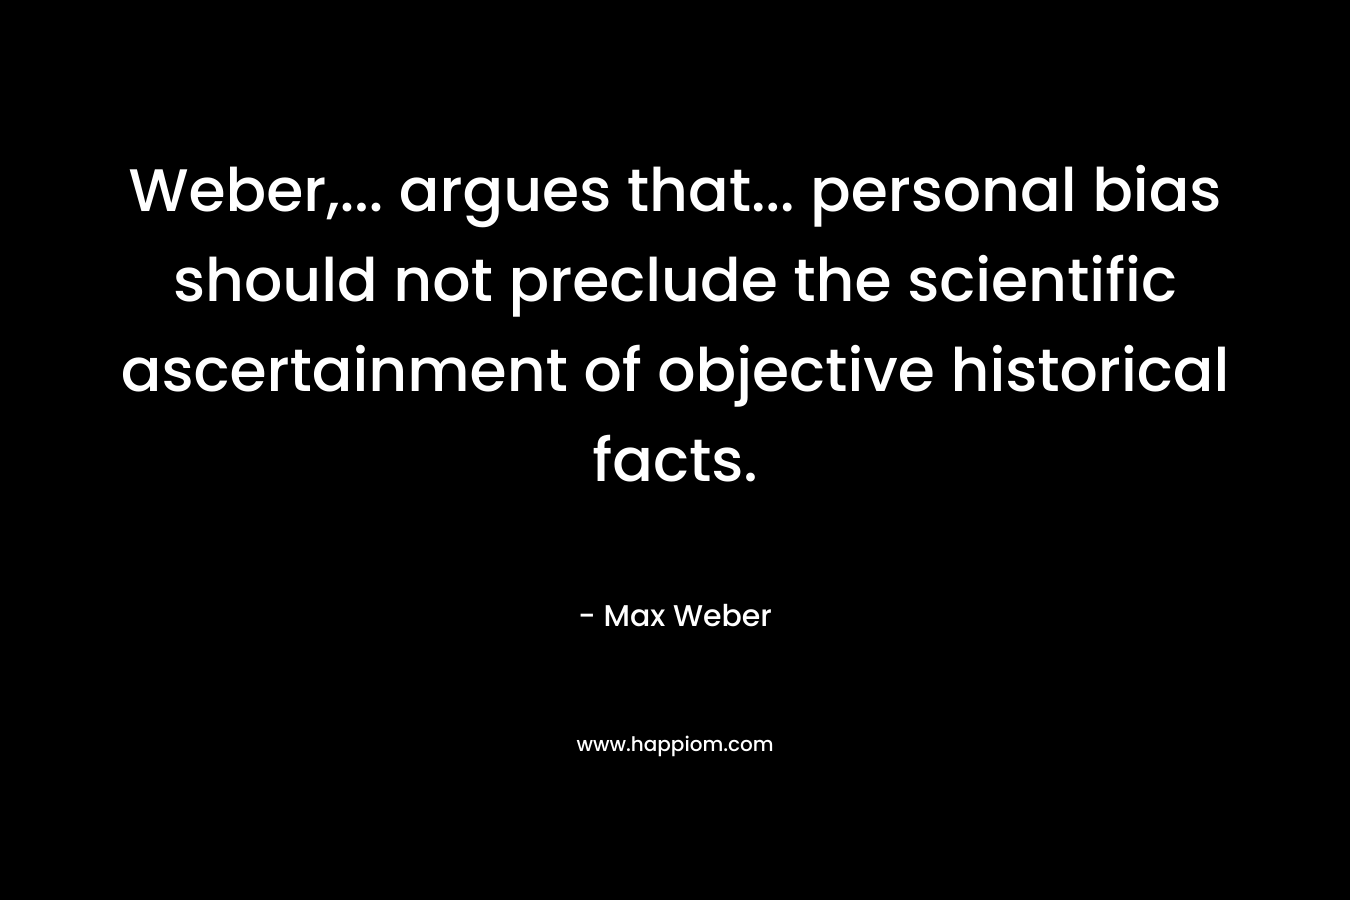 Weber,... argues that... personal bias should not preclude the scientific ascertainment of objective historical facts.